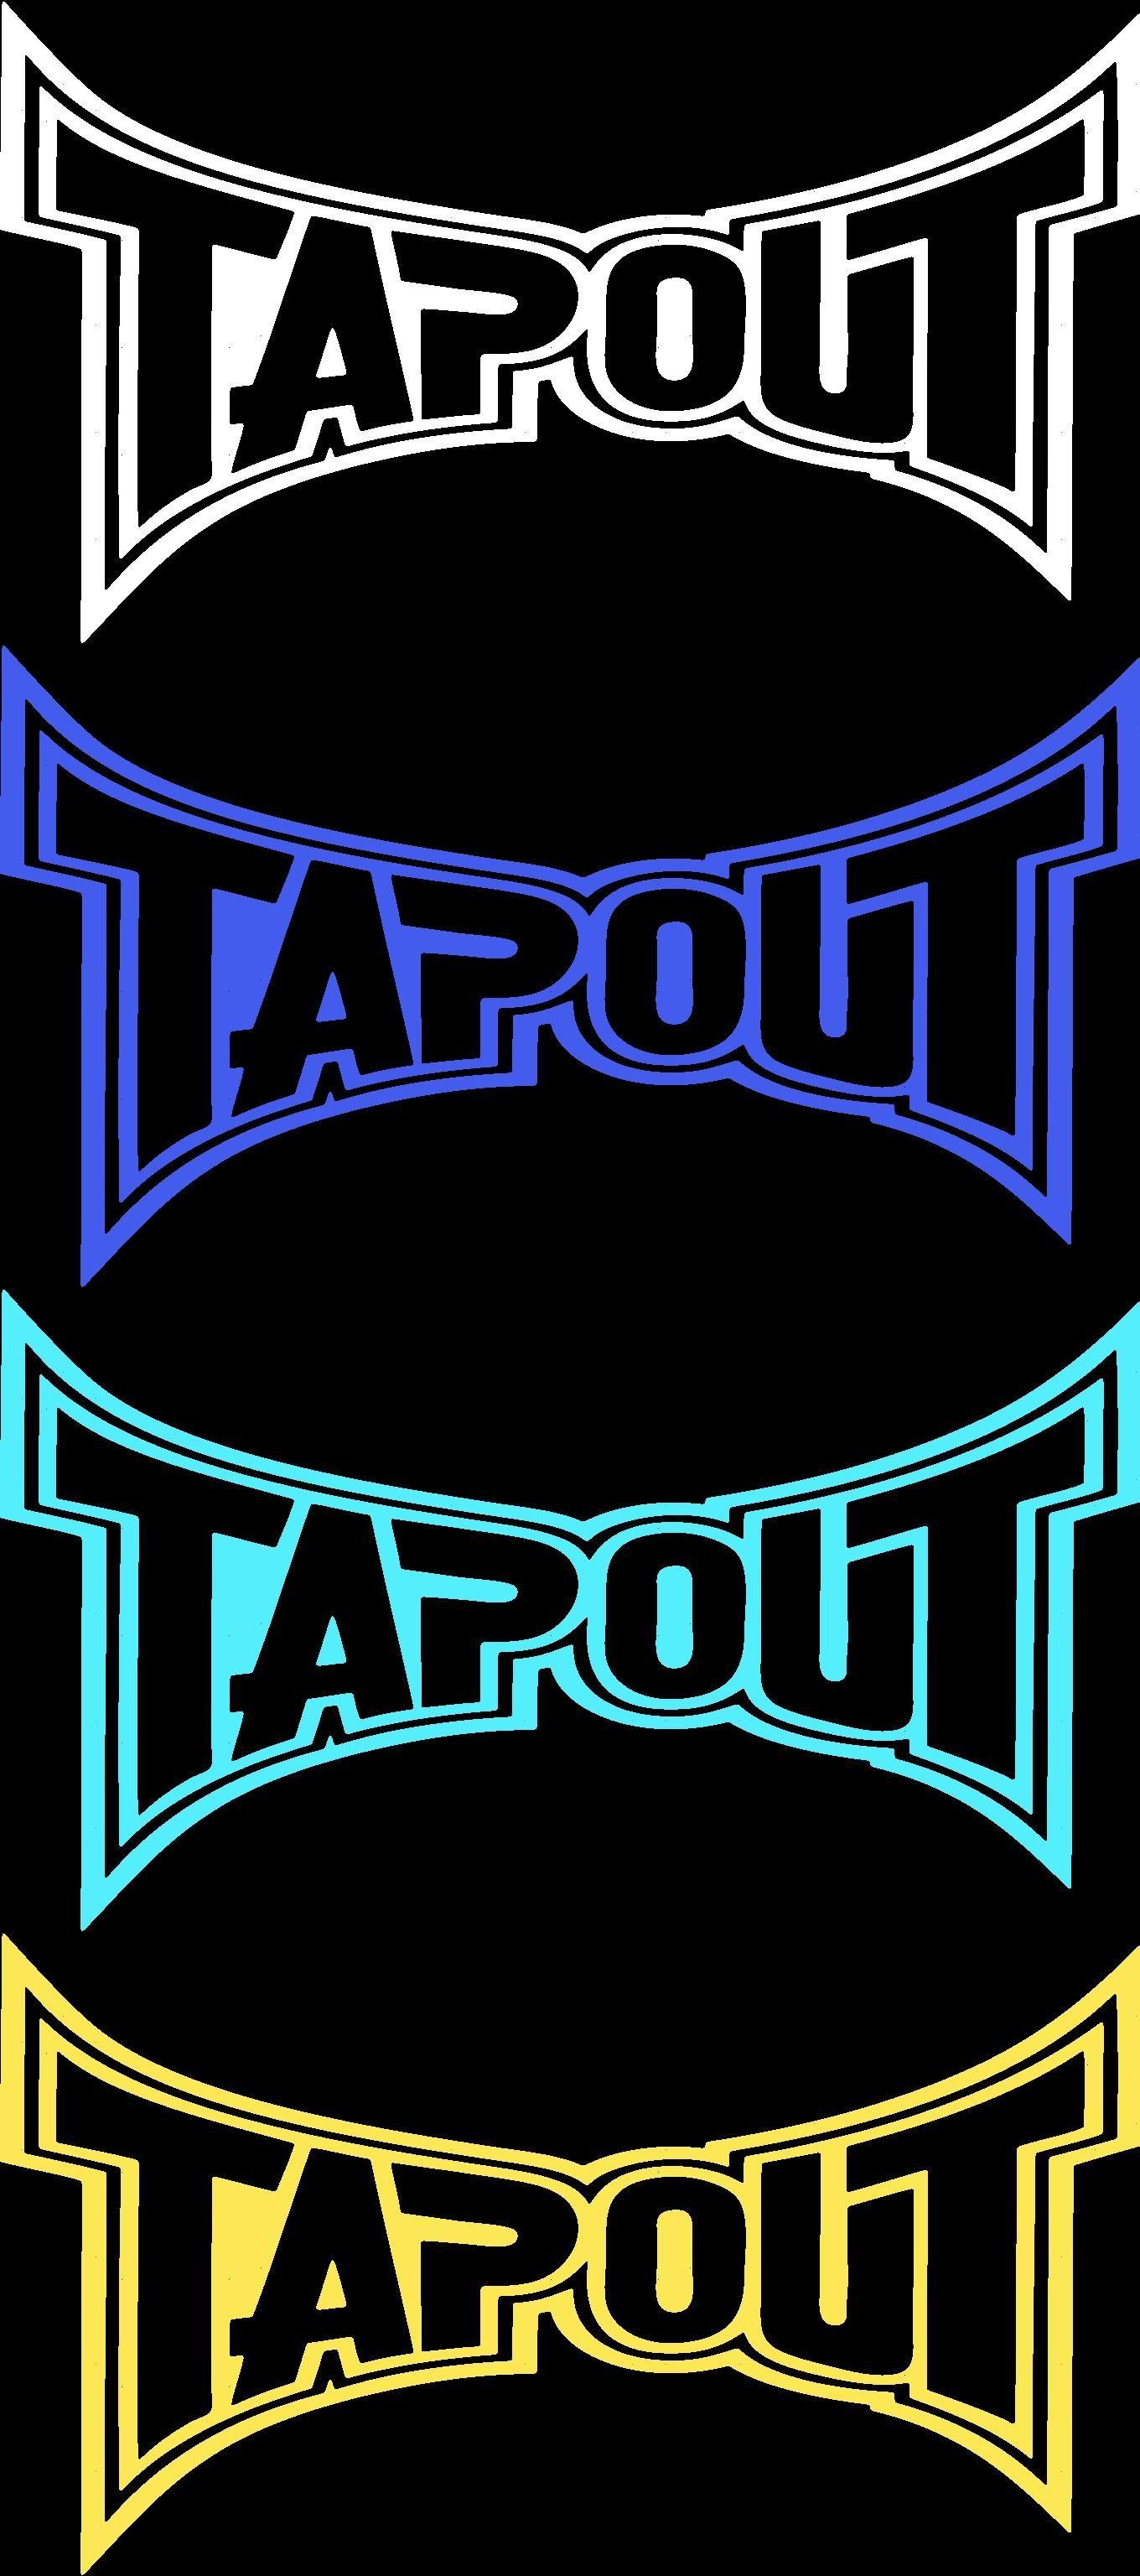 Tapout Logo - TapouT Logo #Tapout #ConceptOne #MMA | #Tapout | Mma, Martial arts ...